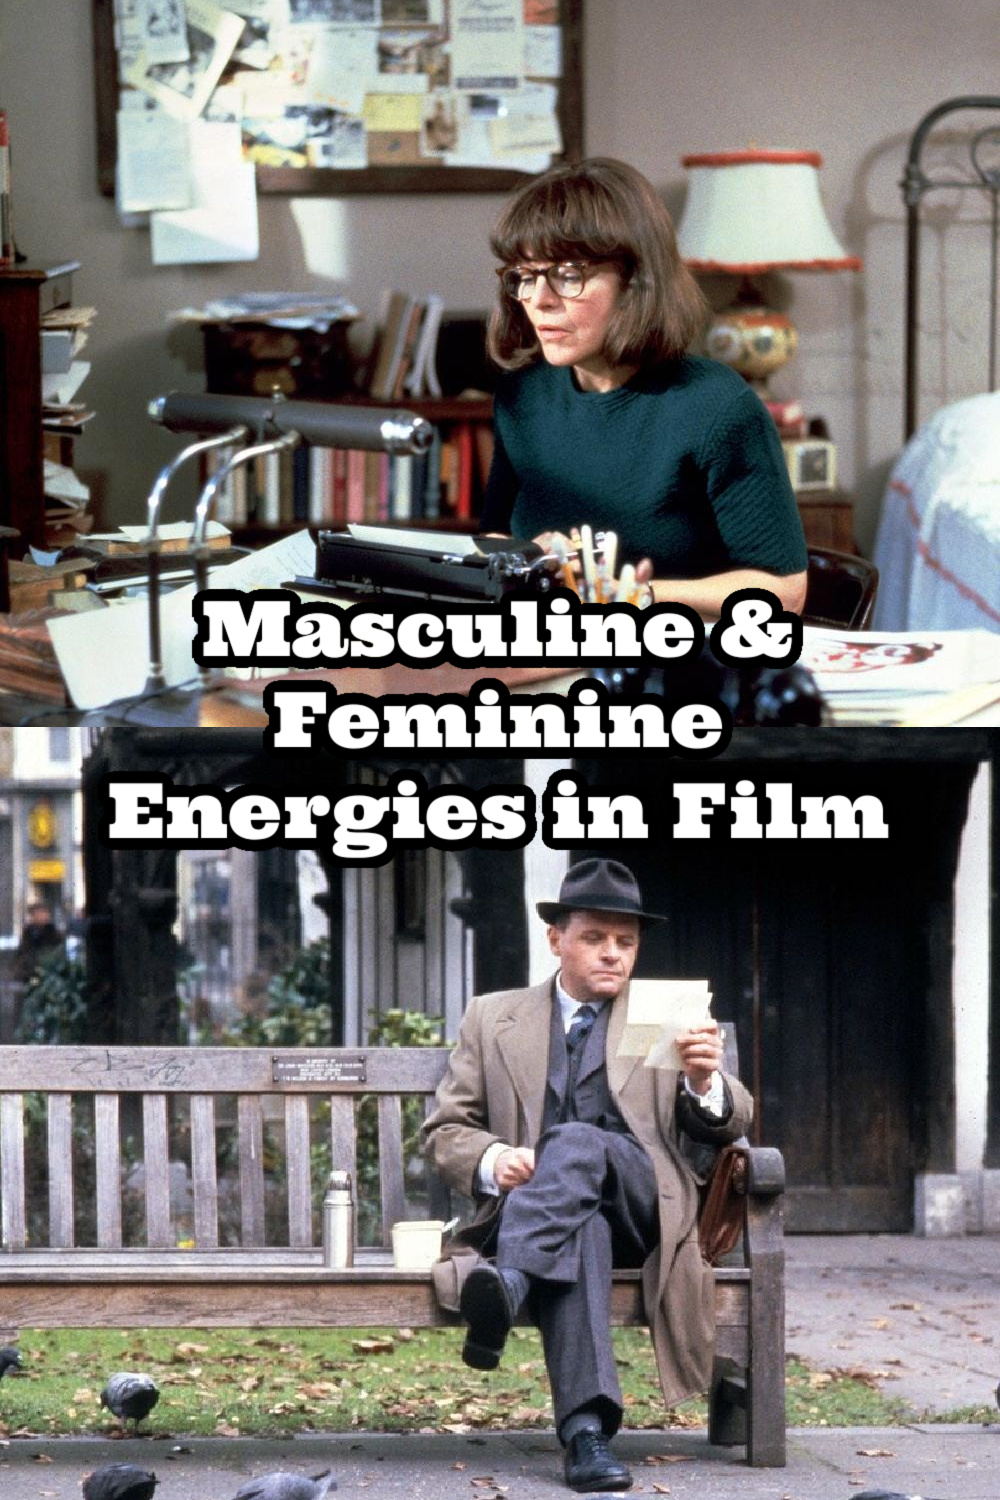 the lover archetype female, the lover archetype in movies, embrace your sensual energy, divine feminine lover, sensual energy, sensuality and sexuality in a relationship, anne bancroft movies, 84 charing cross road movie review, 84 charing cross road, feminine radiance is irresistible, understanding masculine and feminine energy, feminine and masculine energy in relationships, Everyday Starlet, Sarah Blodgett